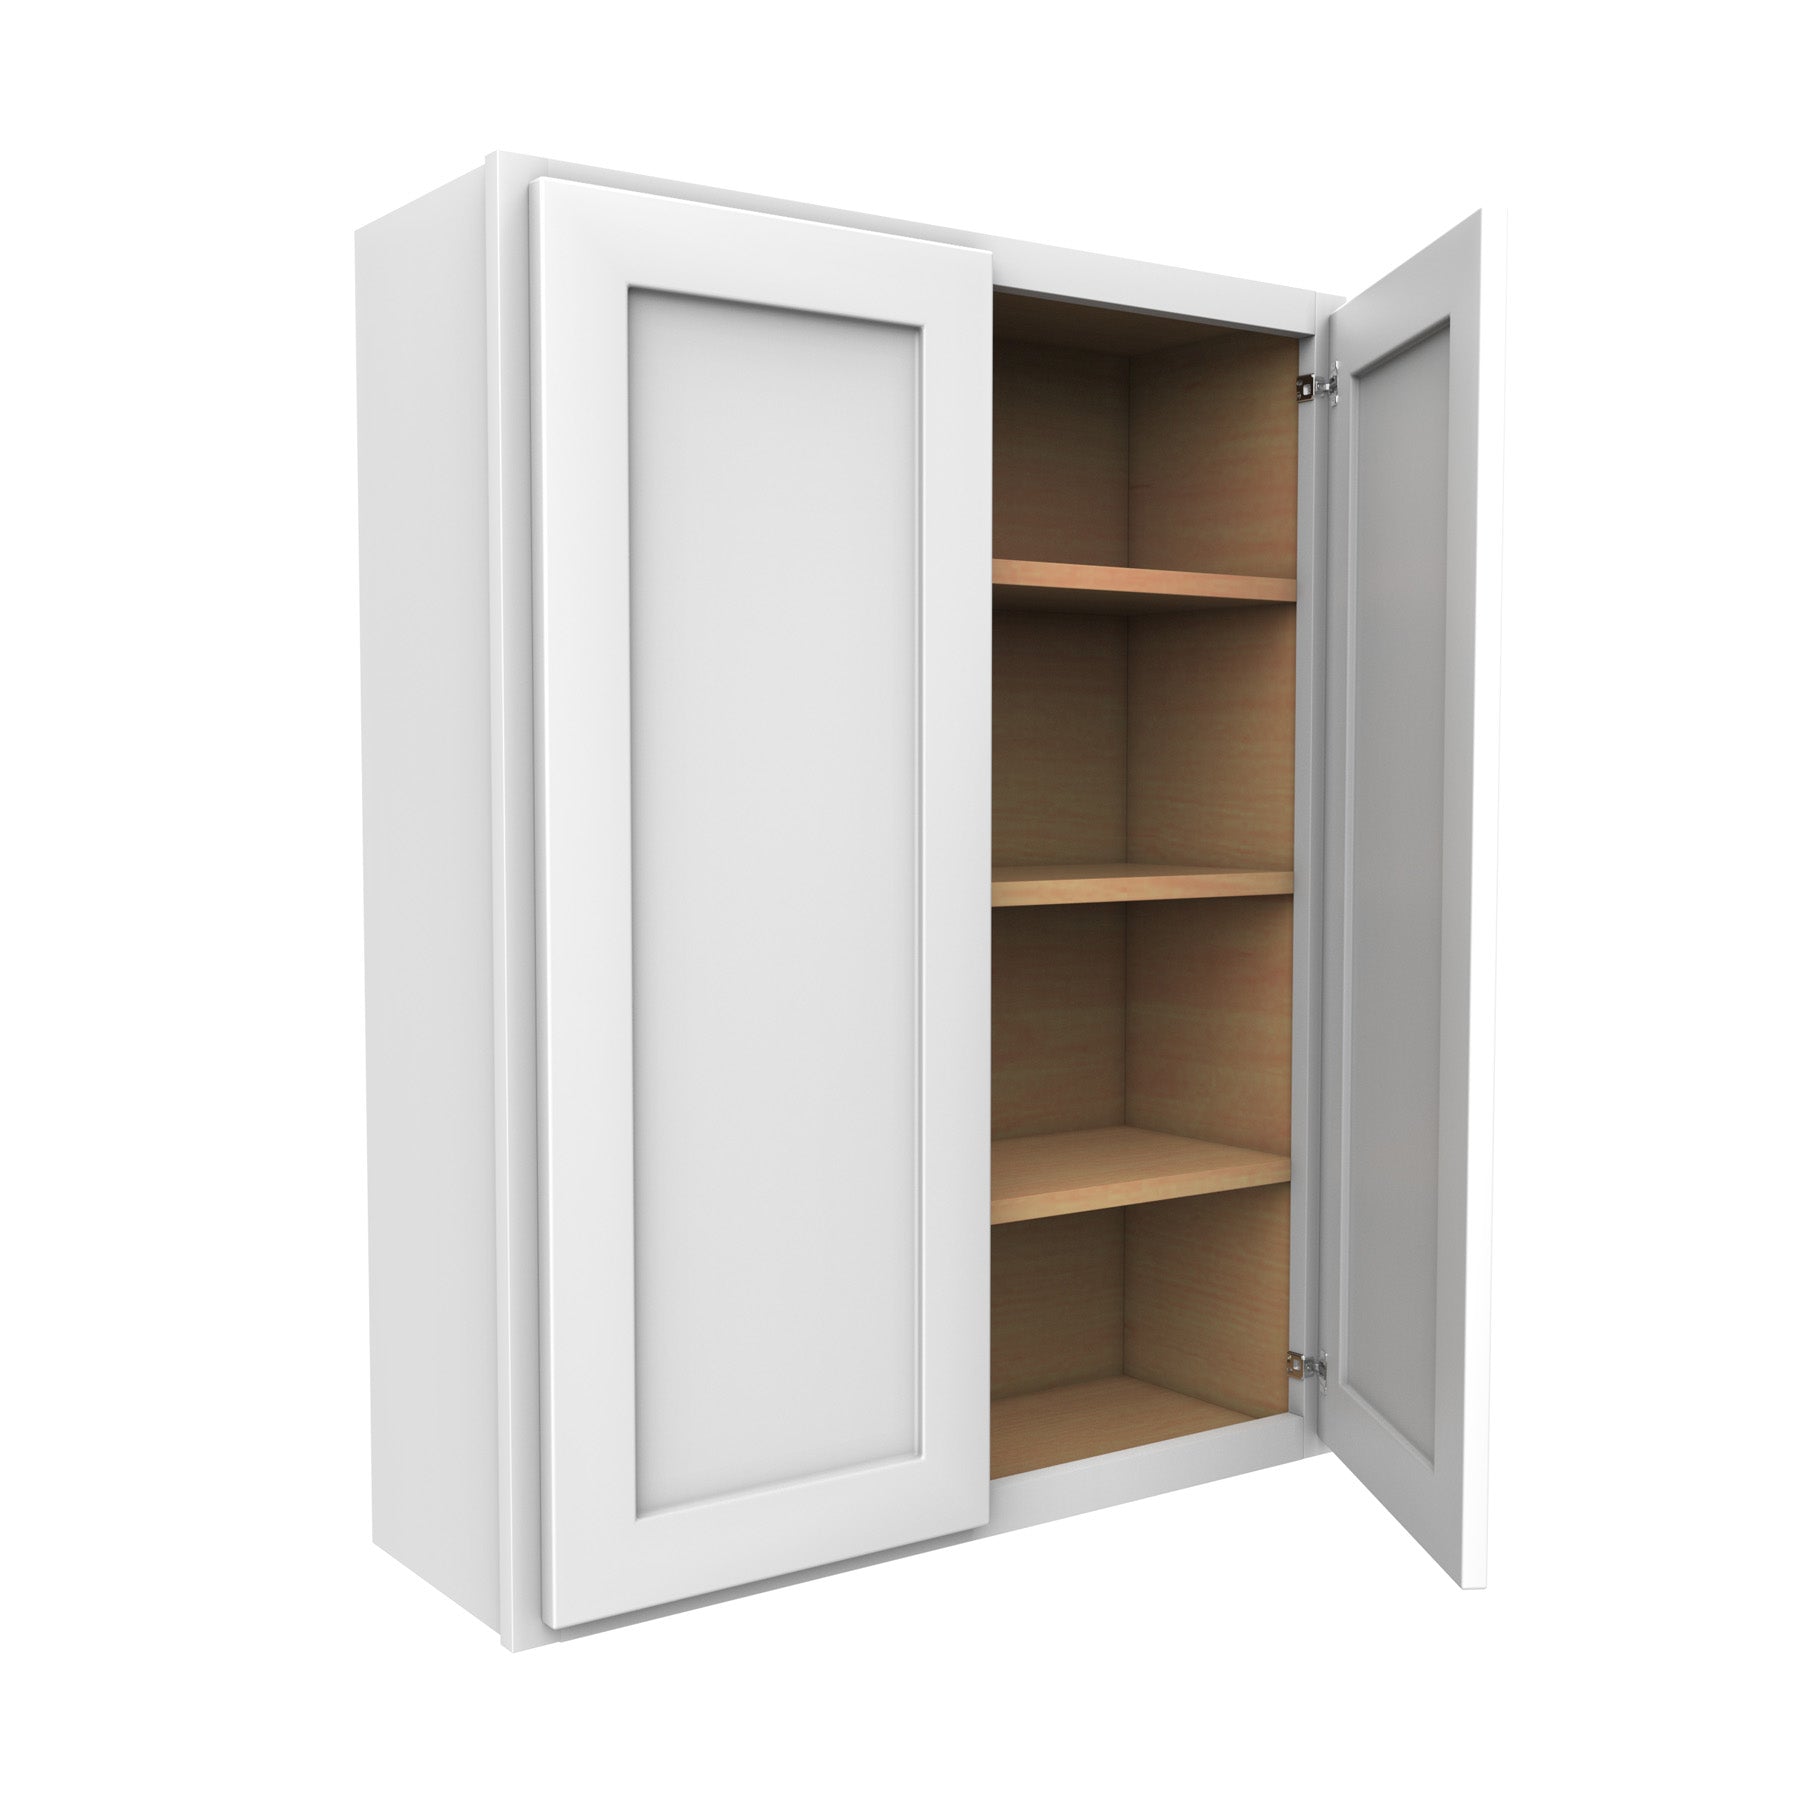 42 Inch High Double Door Wall Cabinet - Luxor White Shaker - Ready To Assemble, 33"W x 42"H x 12"D